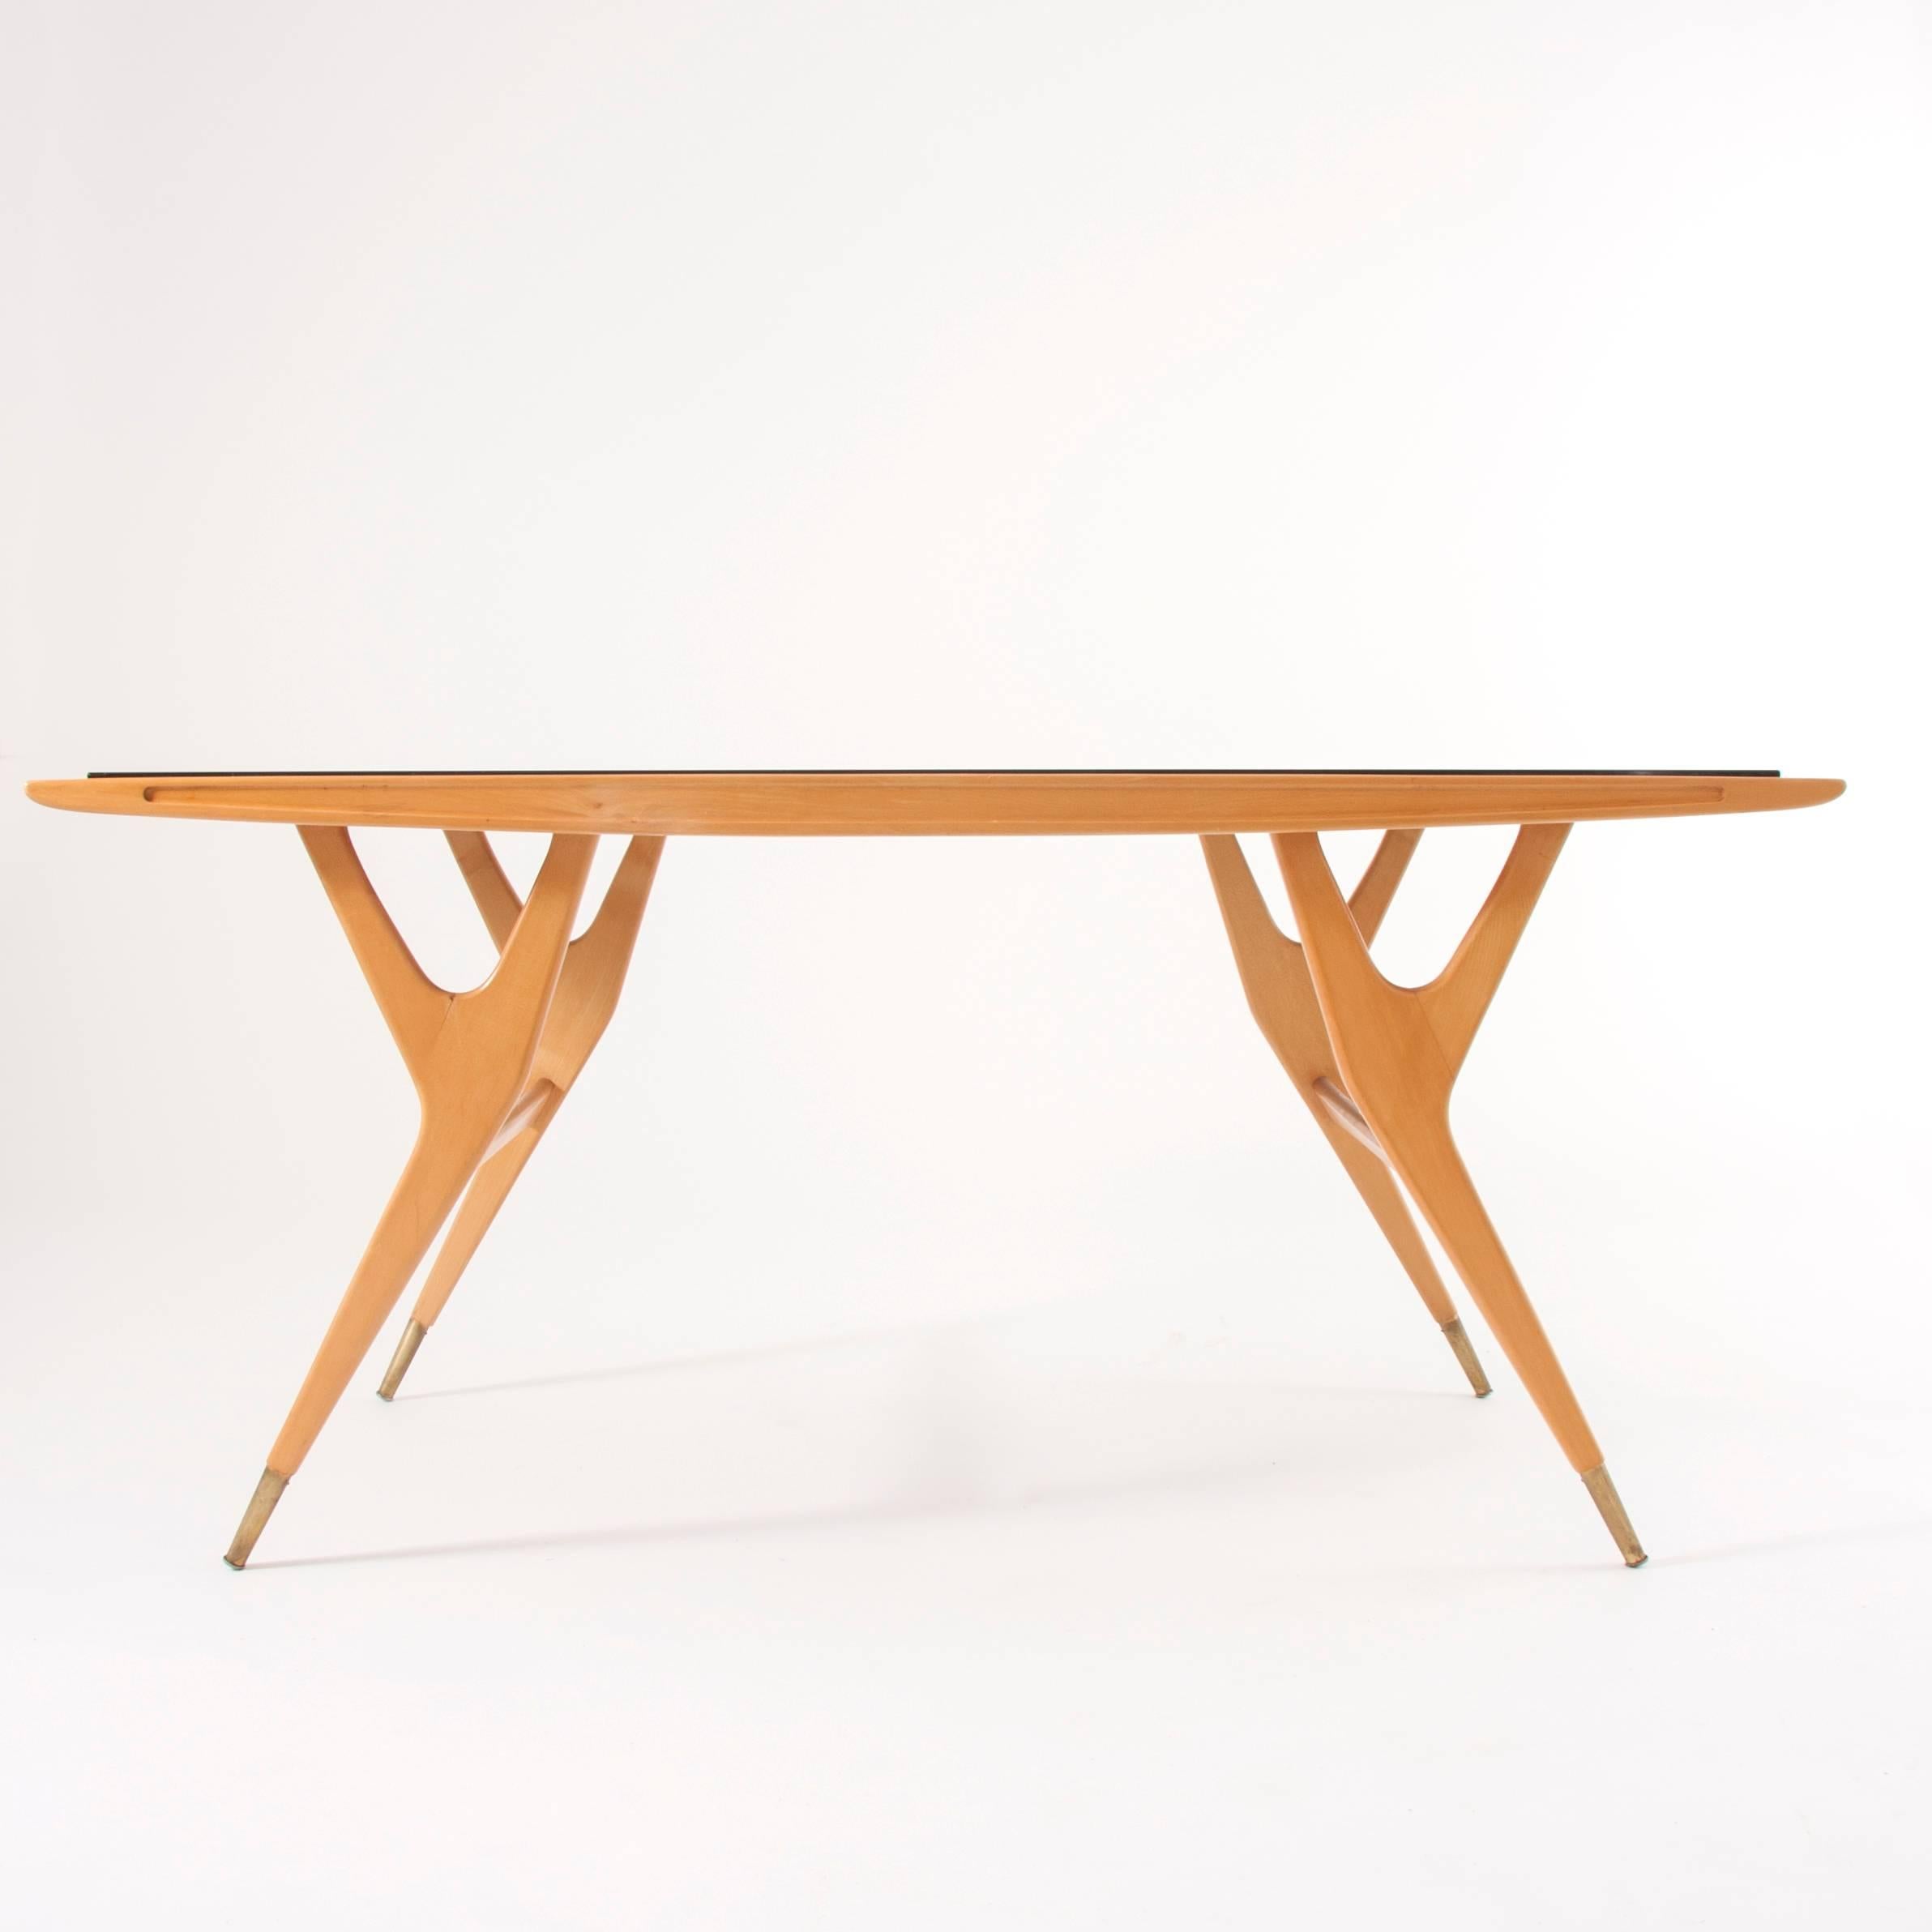 Italian Exceptional Midcentury Coffee Table Attributed to Ico Parisi, Italy, 1950s For Sale